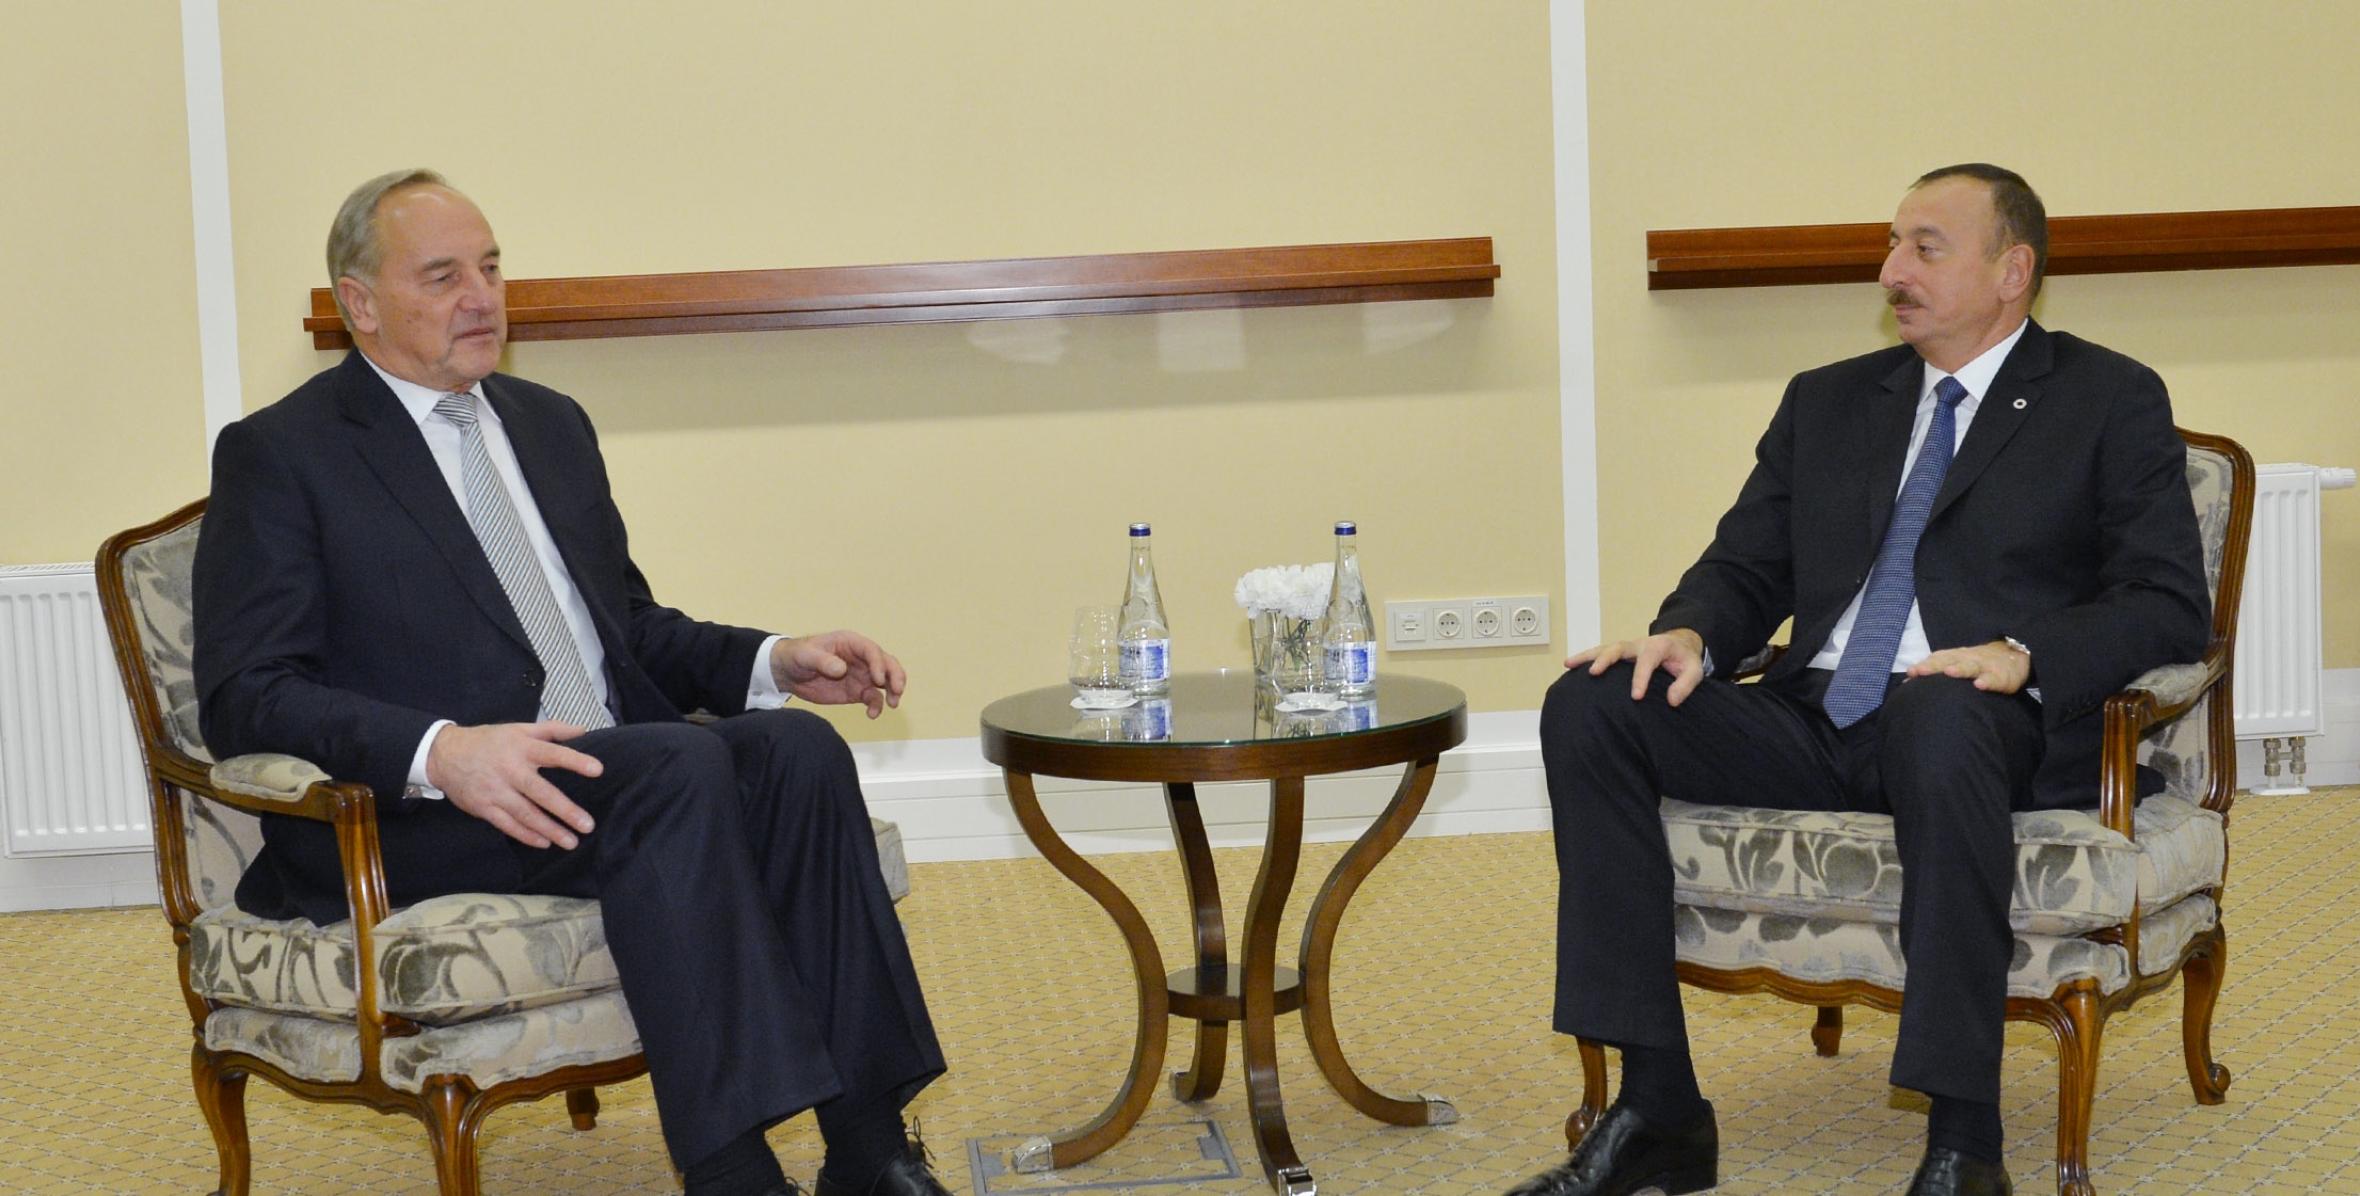 Ilham Aliyev had a meeting with the President of the Republic of Latvia Andris Berzins